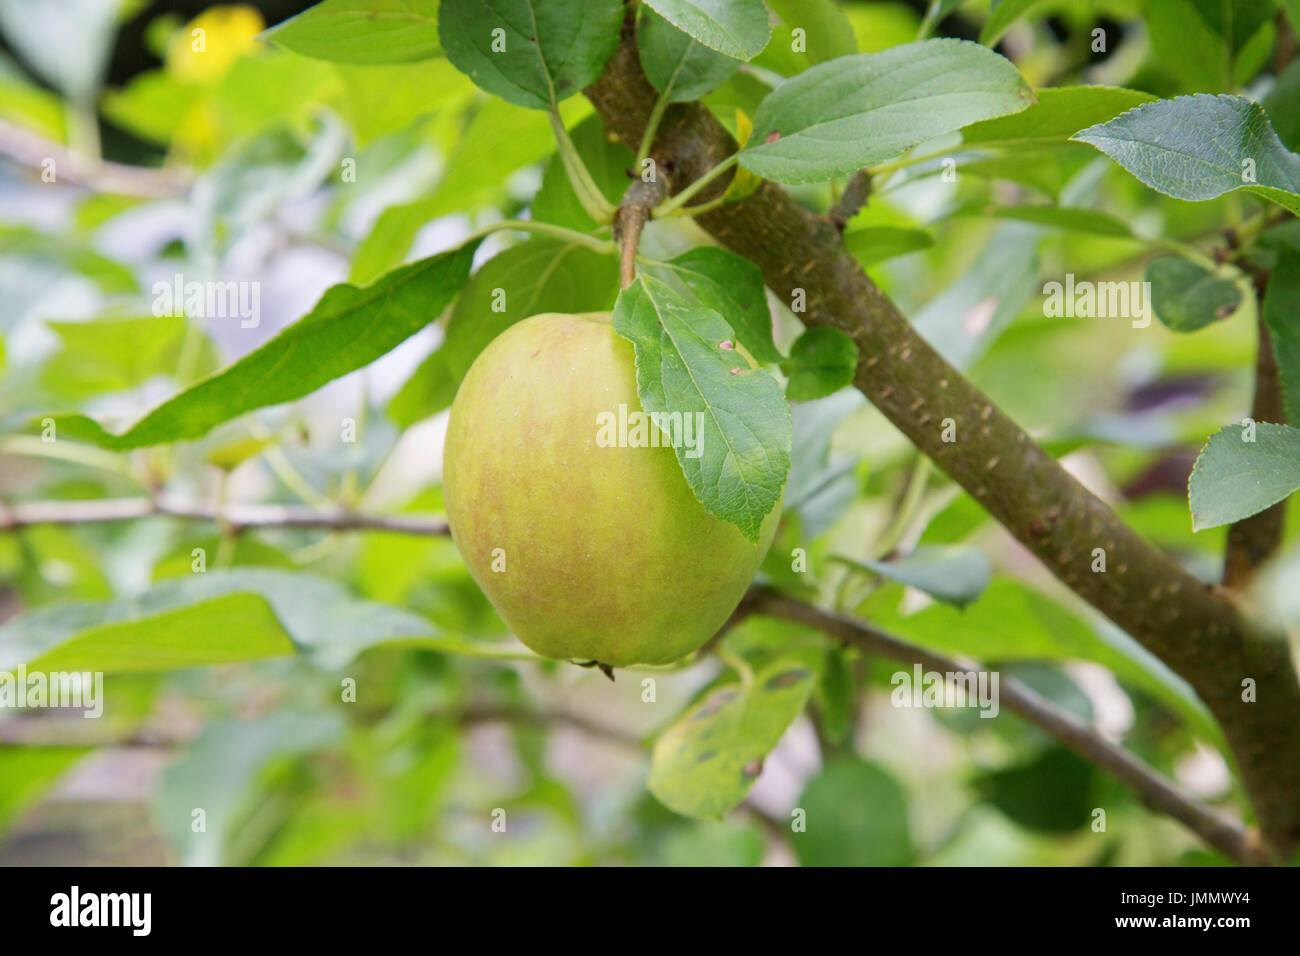 A Small Golden Delicious Apple Growing on a Fruit Tree Stock Photo